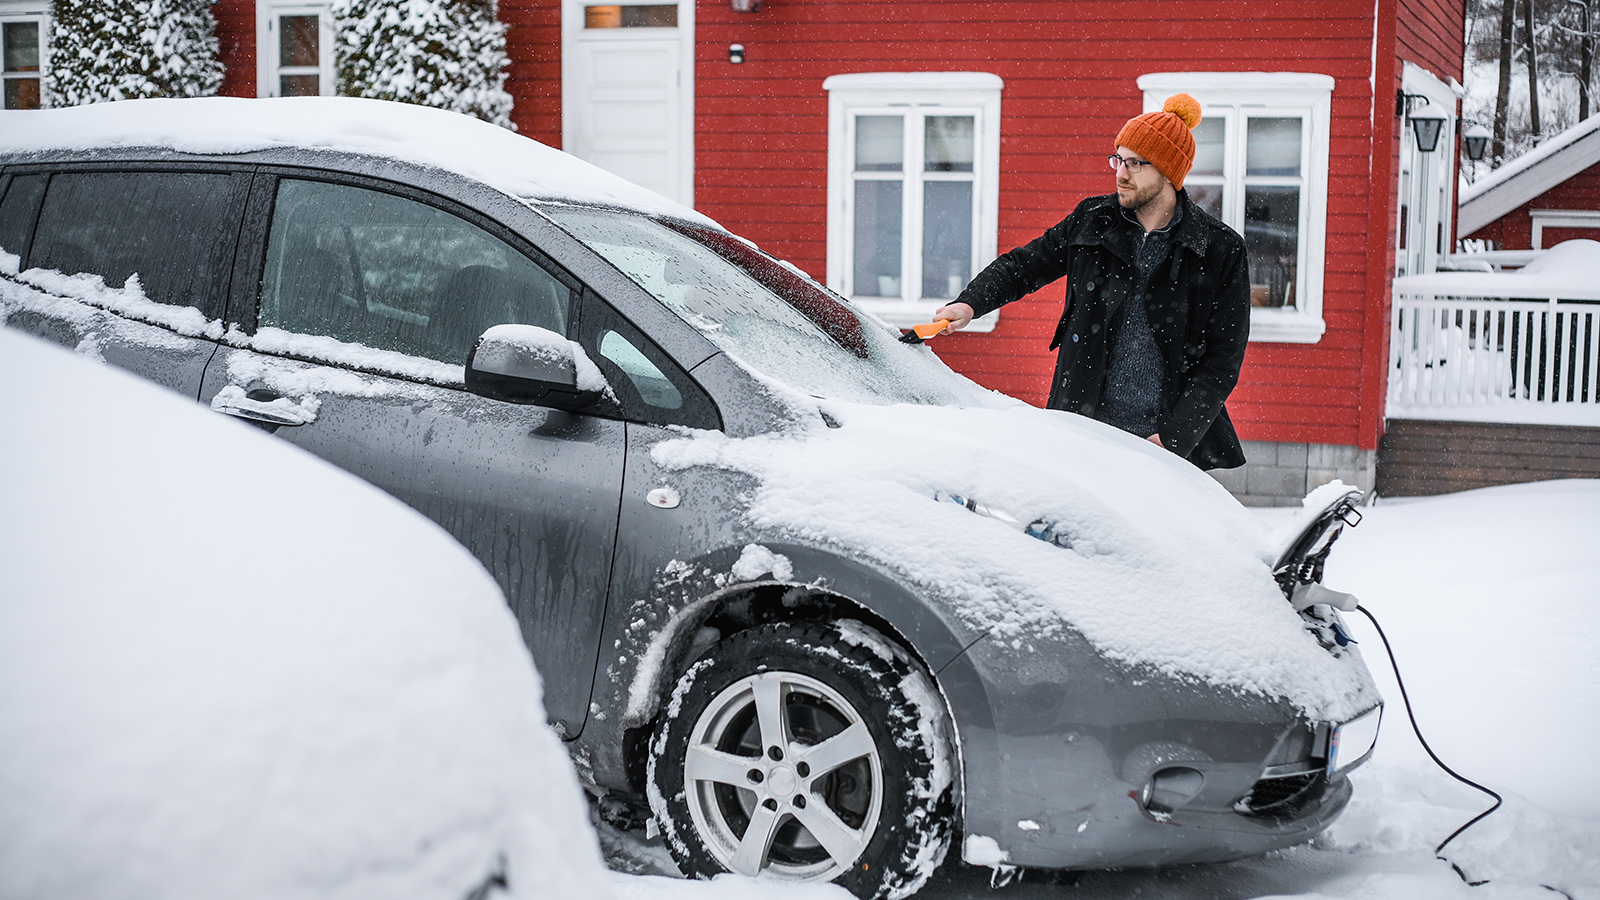 Despite cold winters and long distances Norway is King of E-Mobility